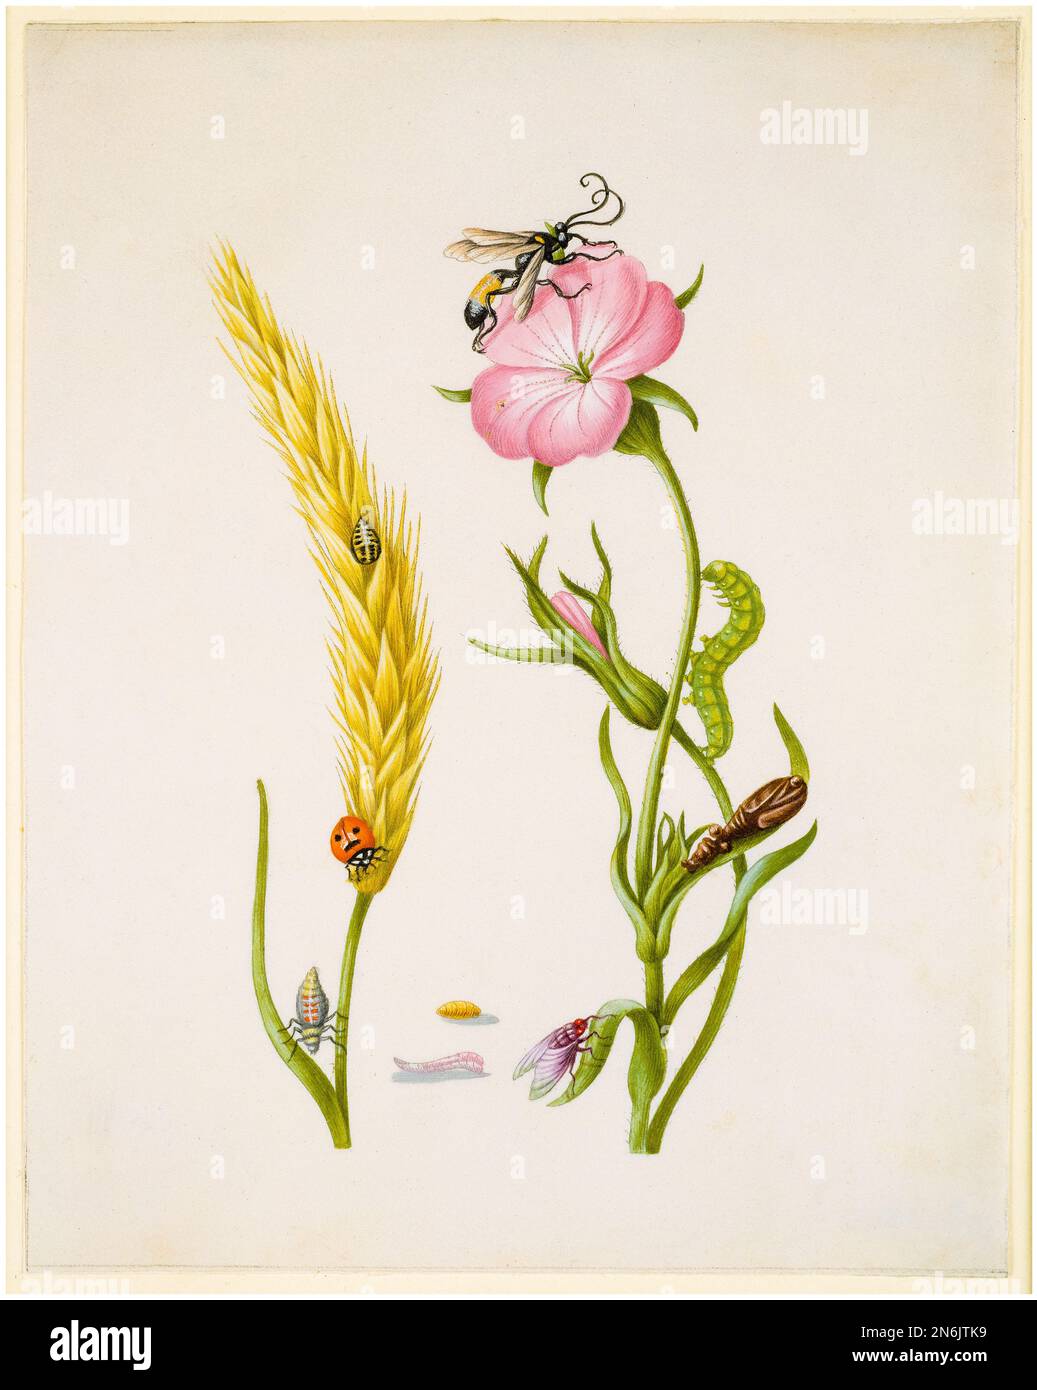 Cereal Ear and Corn Cockle with Metamorphoses of the Five-Spot Ladybird and Blowfly, illustration in watercolour and gouache on vellum by Maria Sibylla Merian, after 1683 Stock Photo